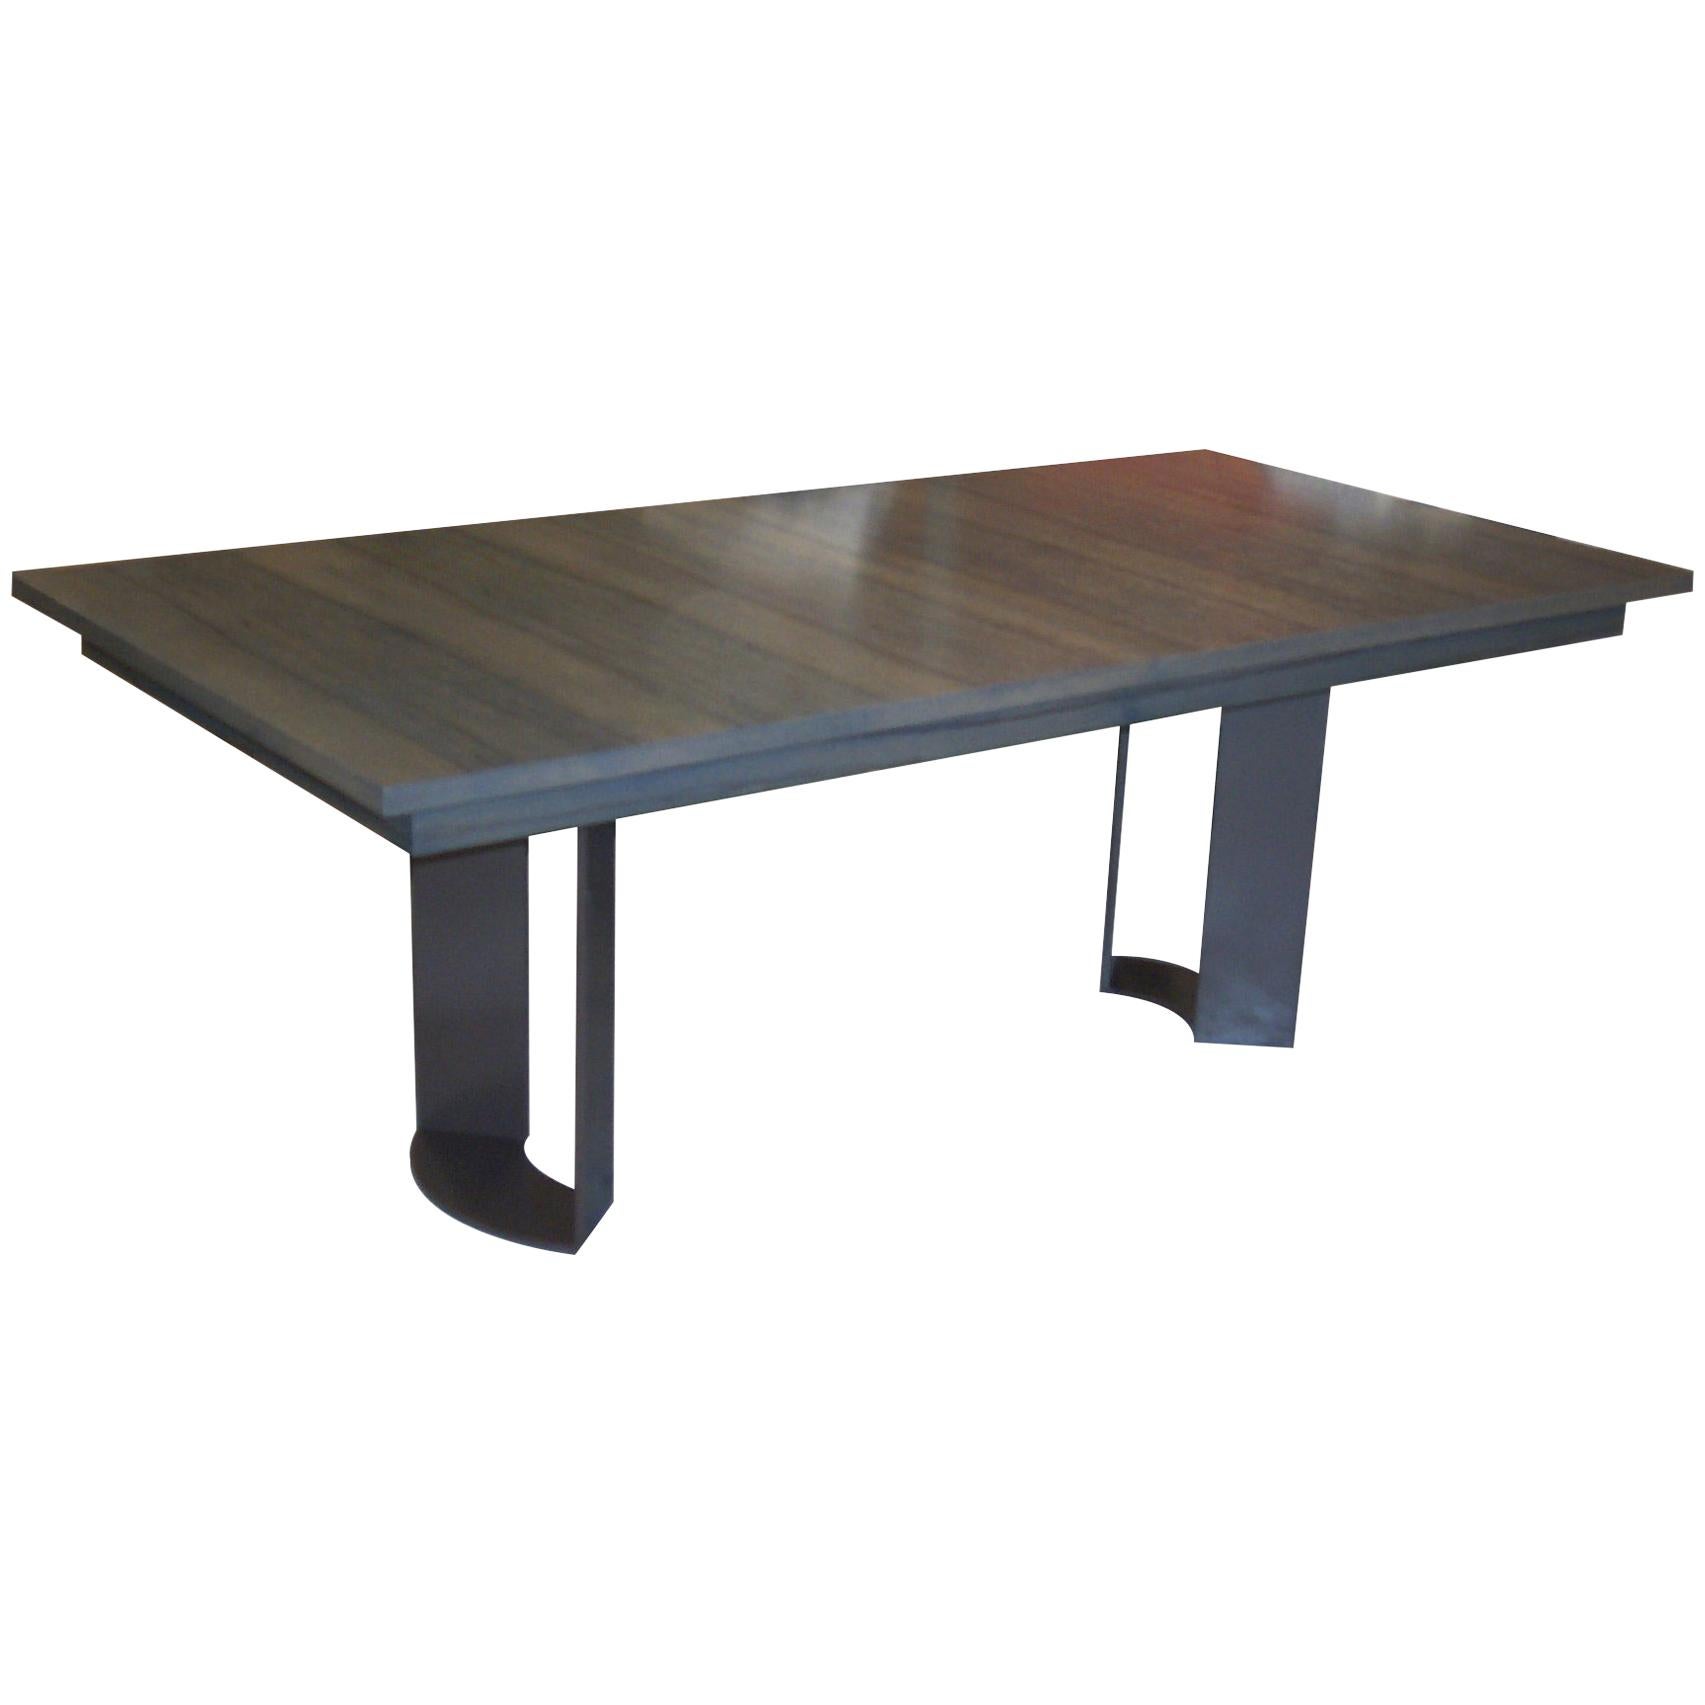 DT-86 Rectangular Dining Table with Recessed Table Apron For Sale